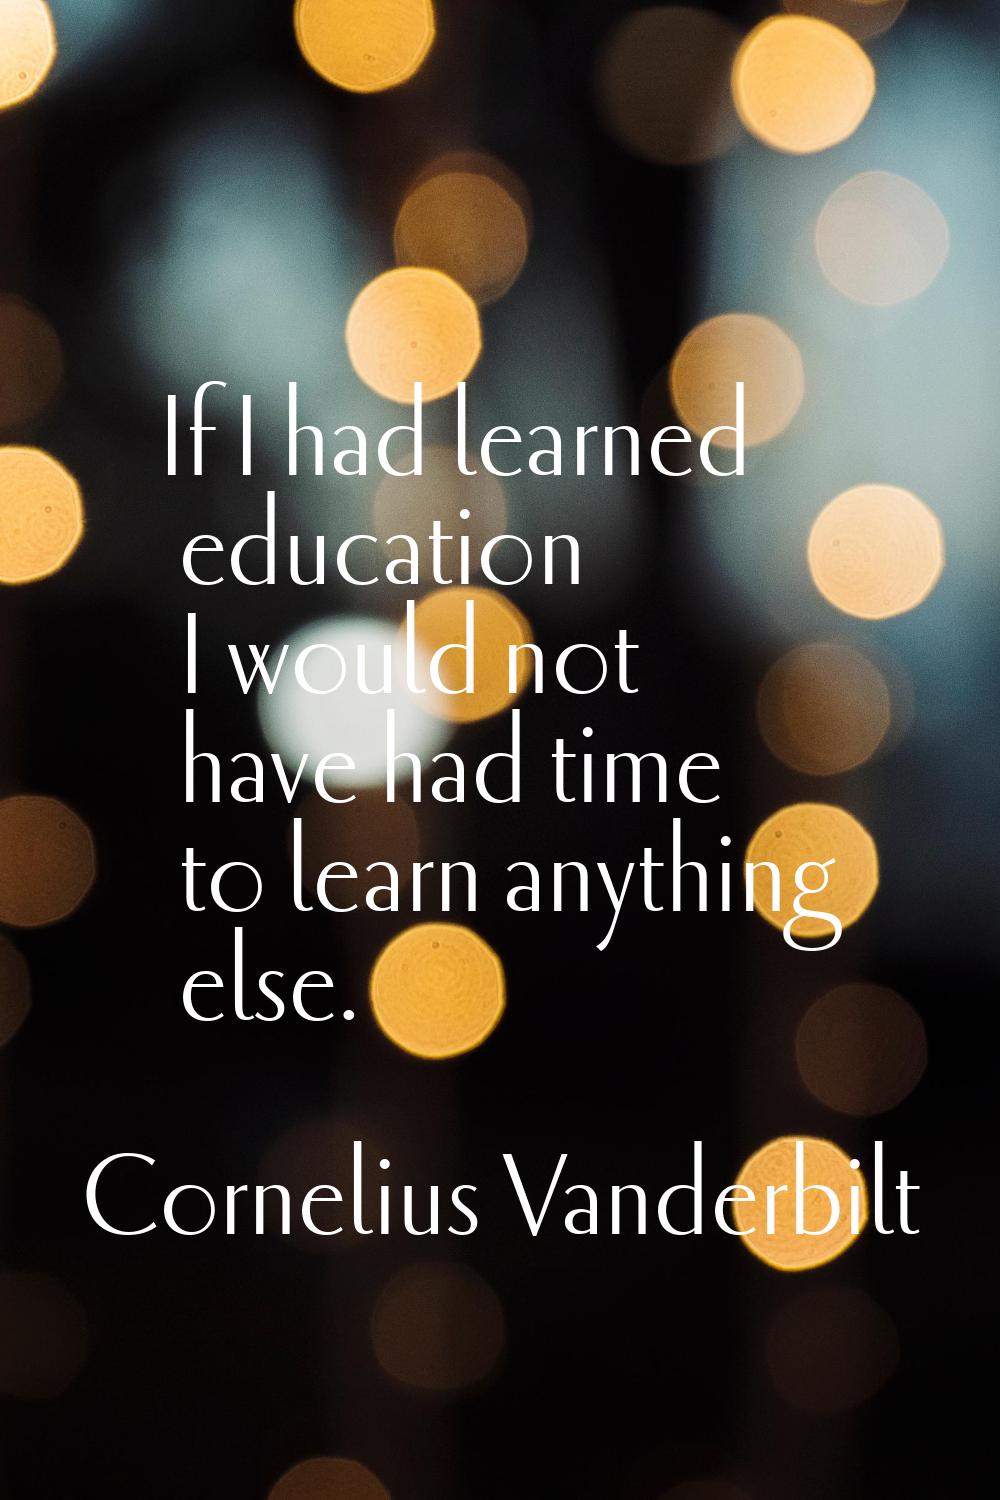 If I had learned education I would not have had time to learn anything else.